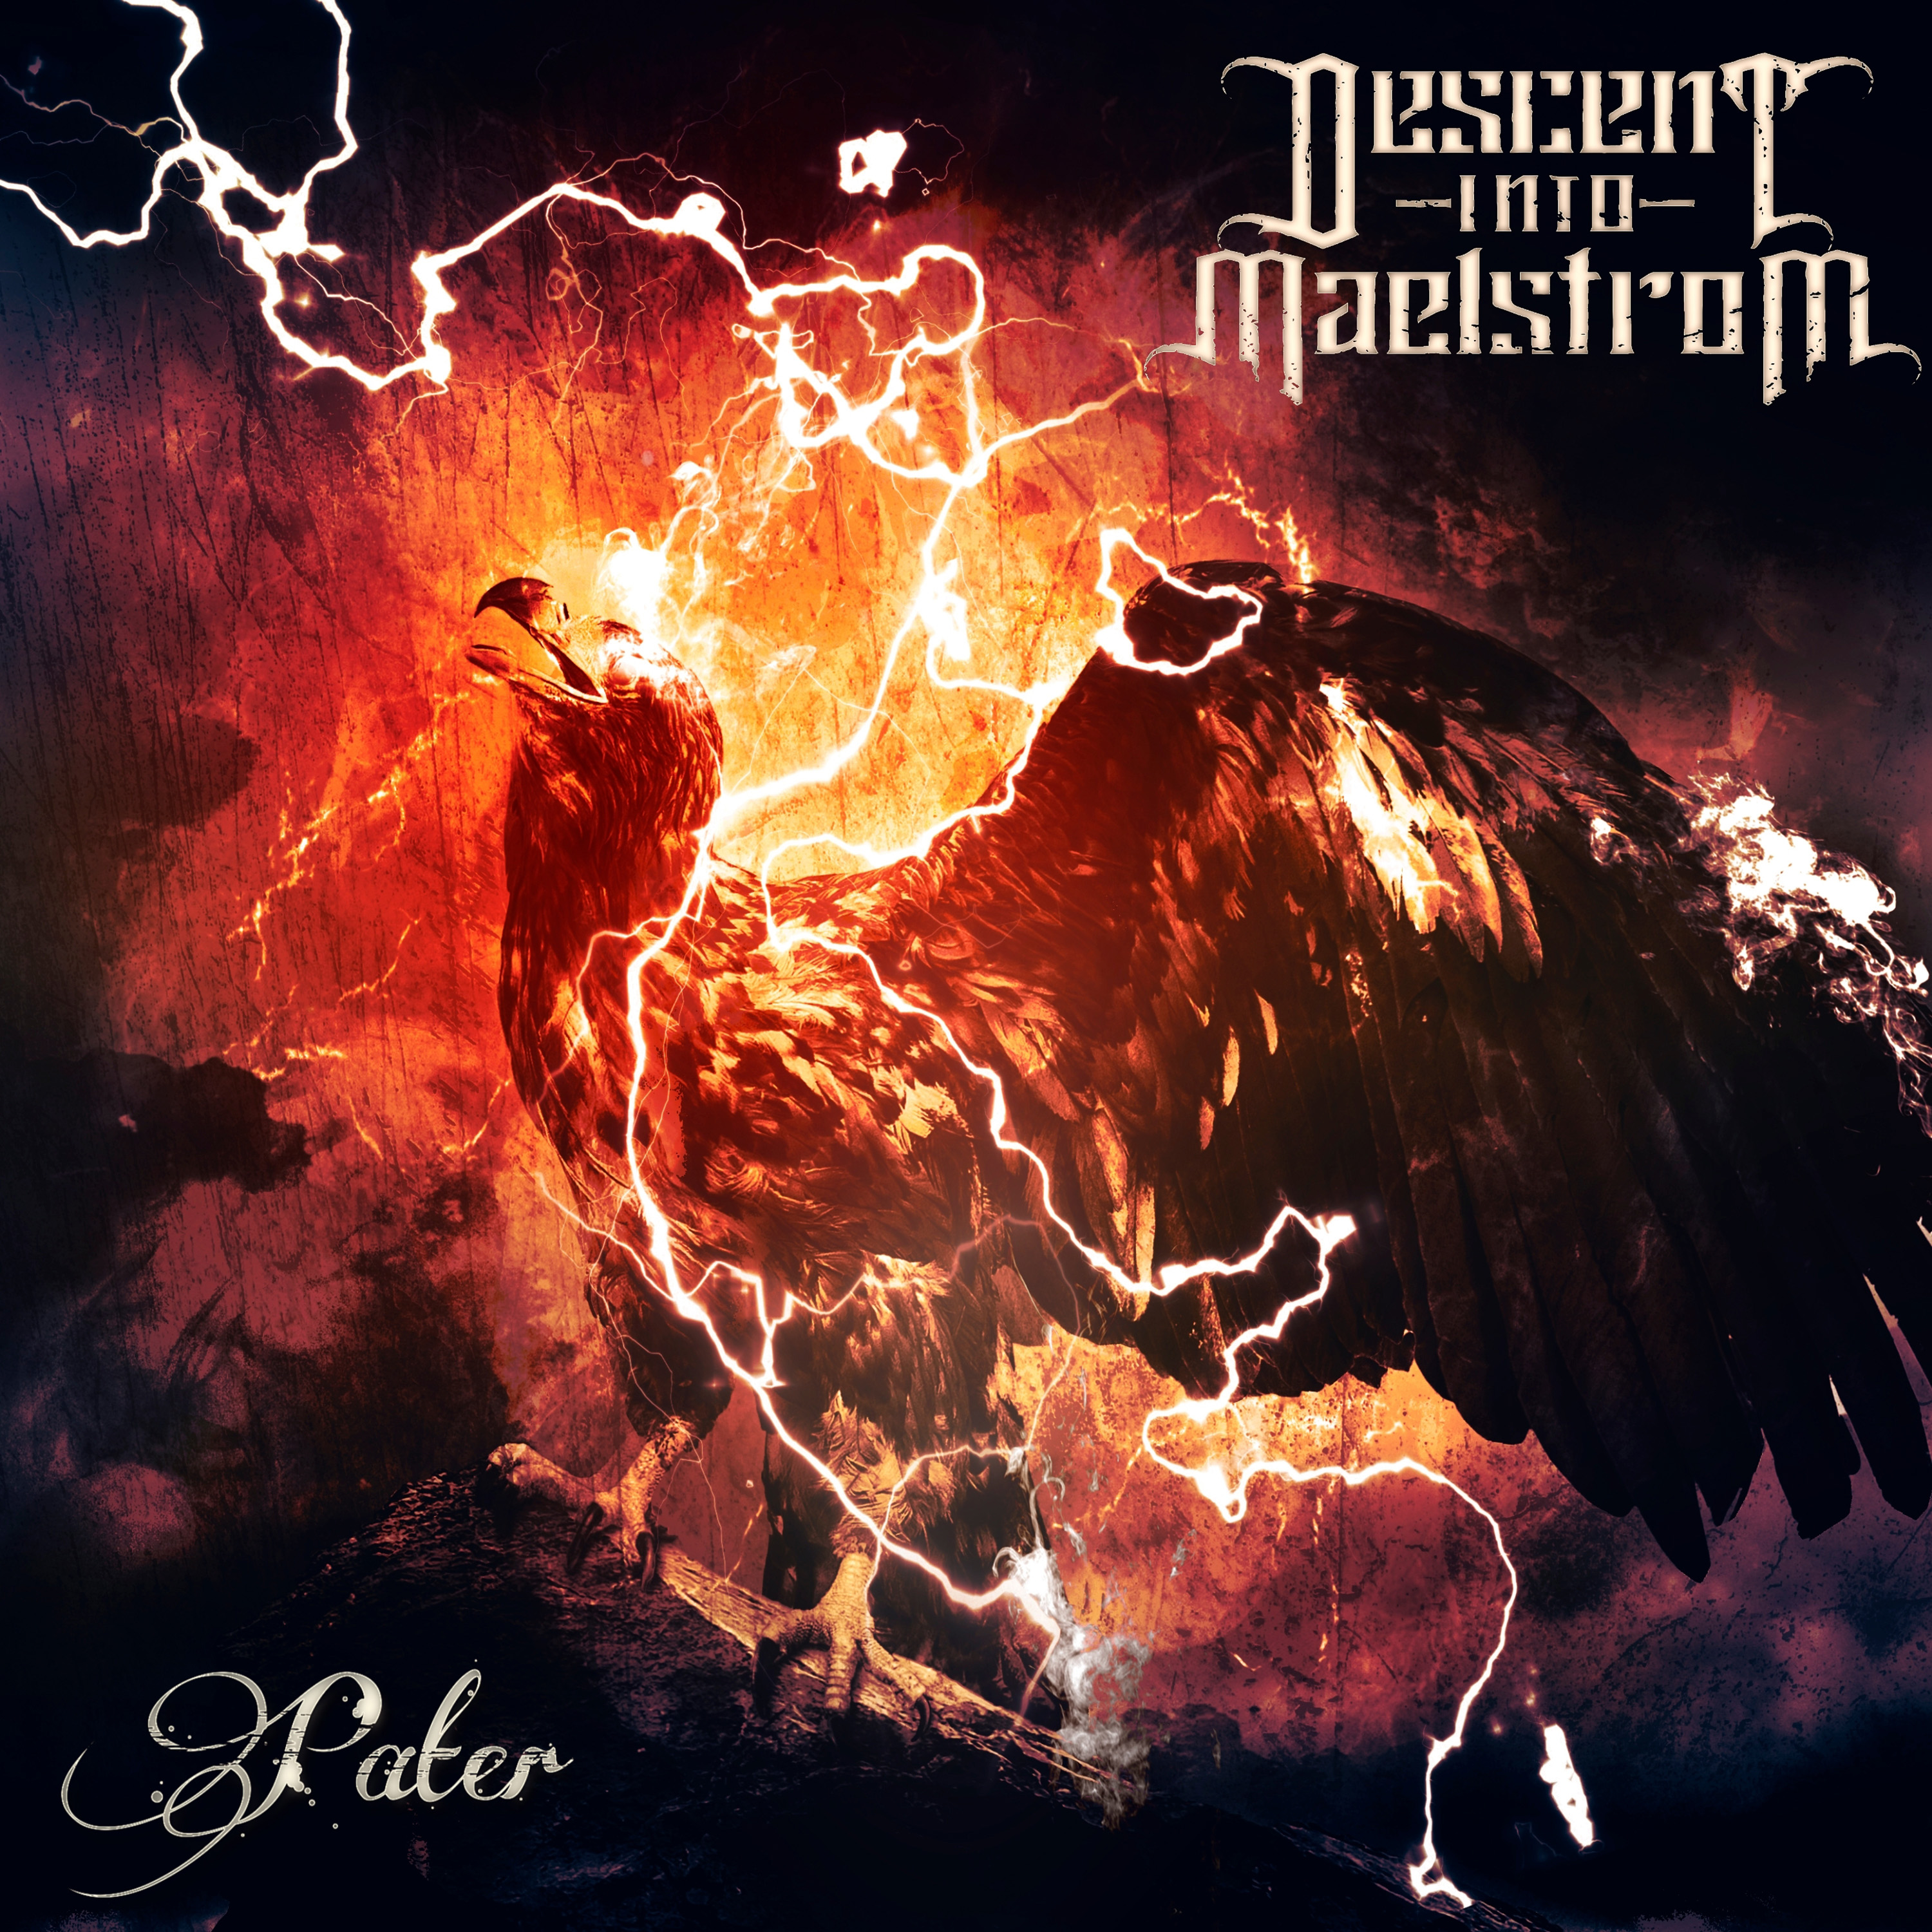 Descent Into Maelstrom - cover official